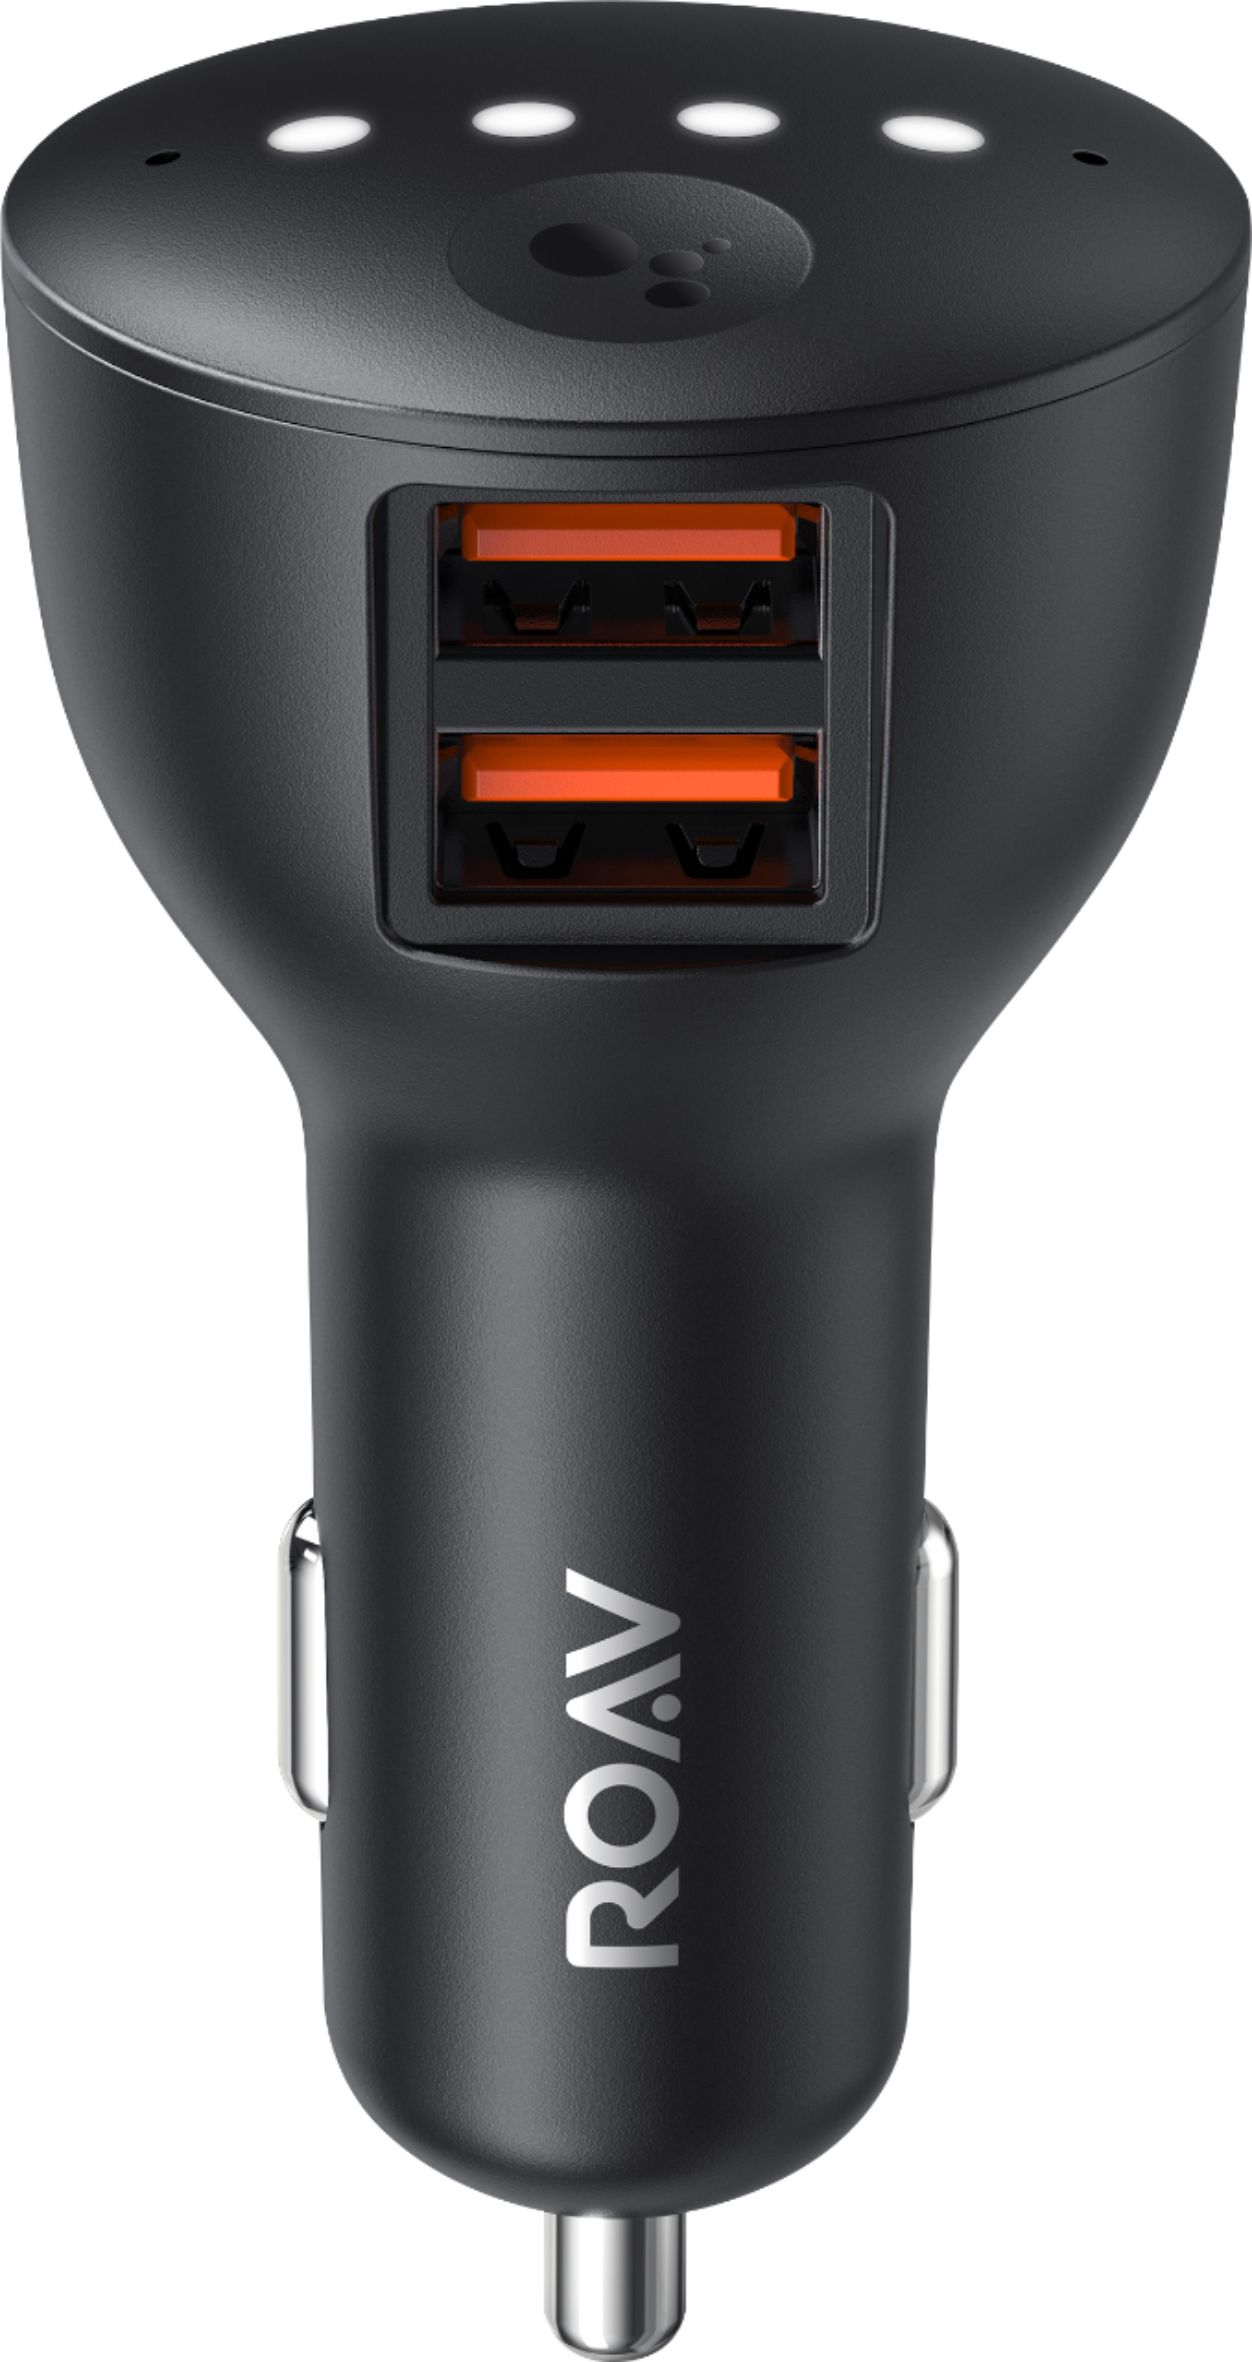  Roav Viva Pro, by Anker, Alexa-Enabled 2-Port USB Car Charger  for Navigation and Music Streaming, for Cars with Bluetooth/CarPlay/Android  Auto/Aux-in/FM Reception : Cell Phones & Accessories